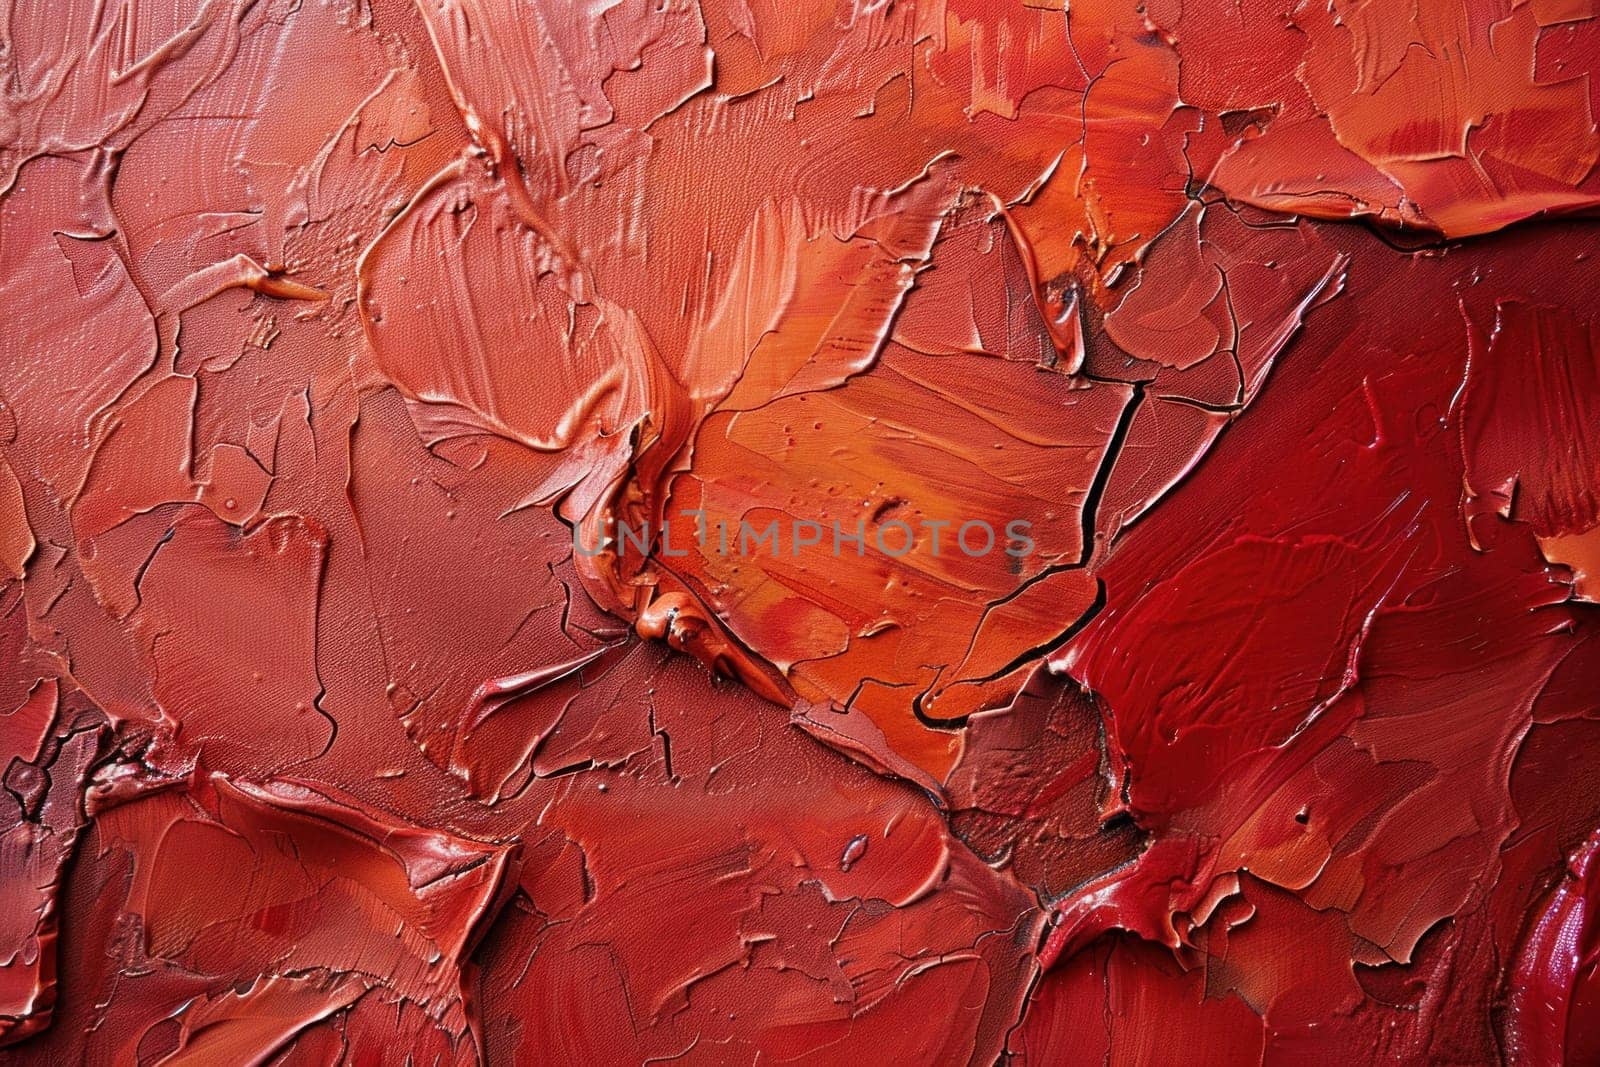 Vibrant abstract painting of red and orange in a modern office setting as a symbol of creativity and inspiration